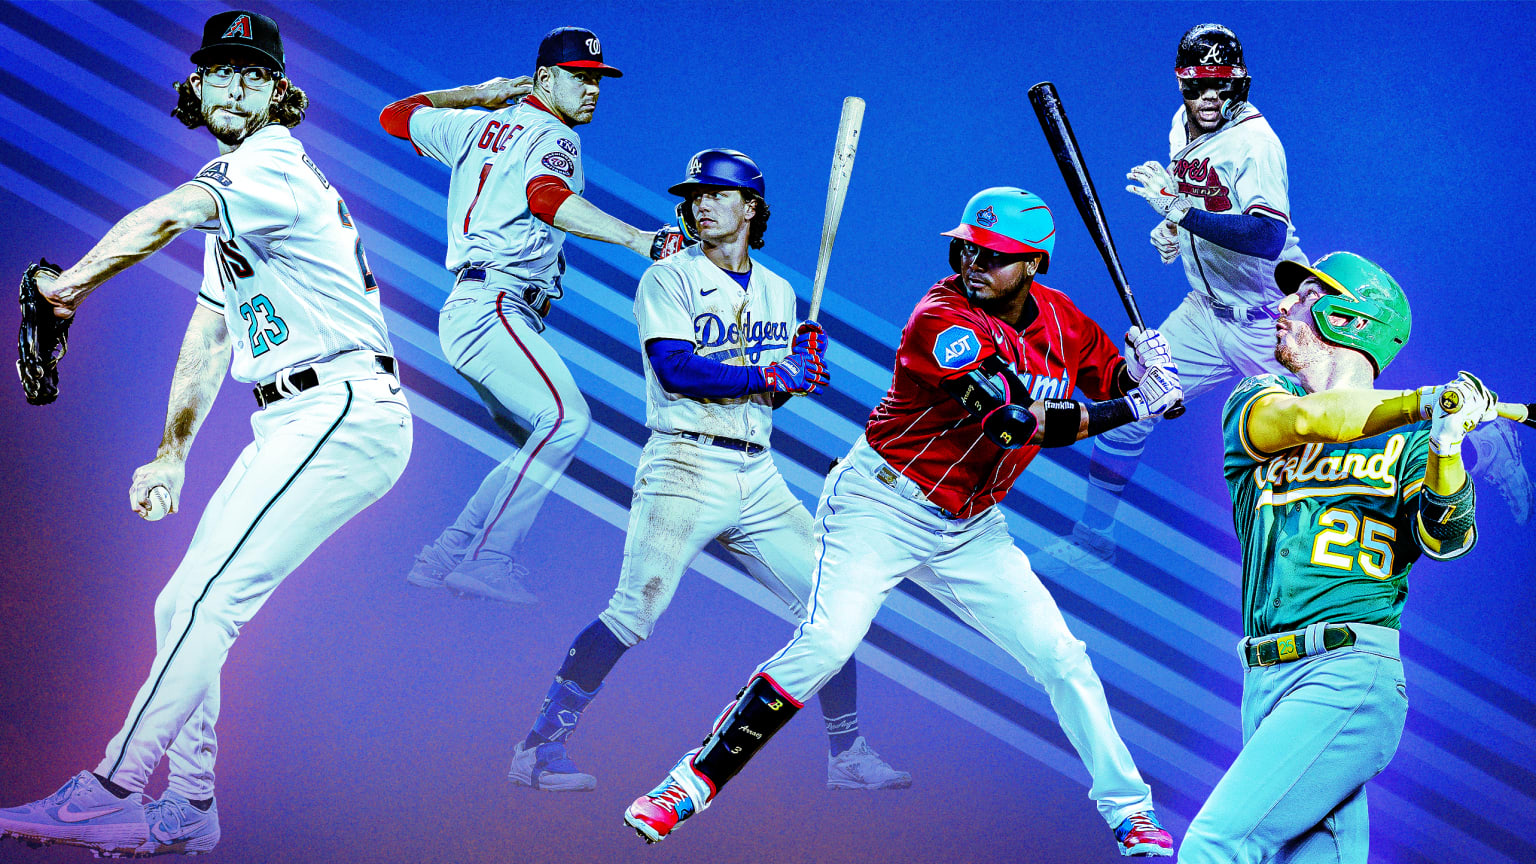 Zac Gallen, MacKenzie Gore, James Outman, Luis Arraez, Ronald Acuña Jr. and Brent Rooker are pictured in front of a blue and purple background 